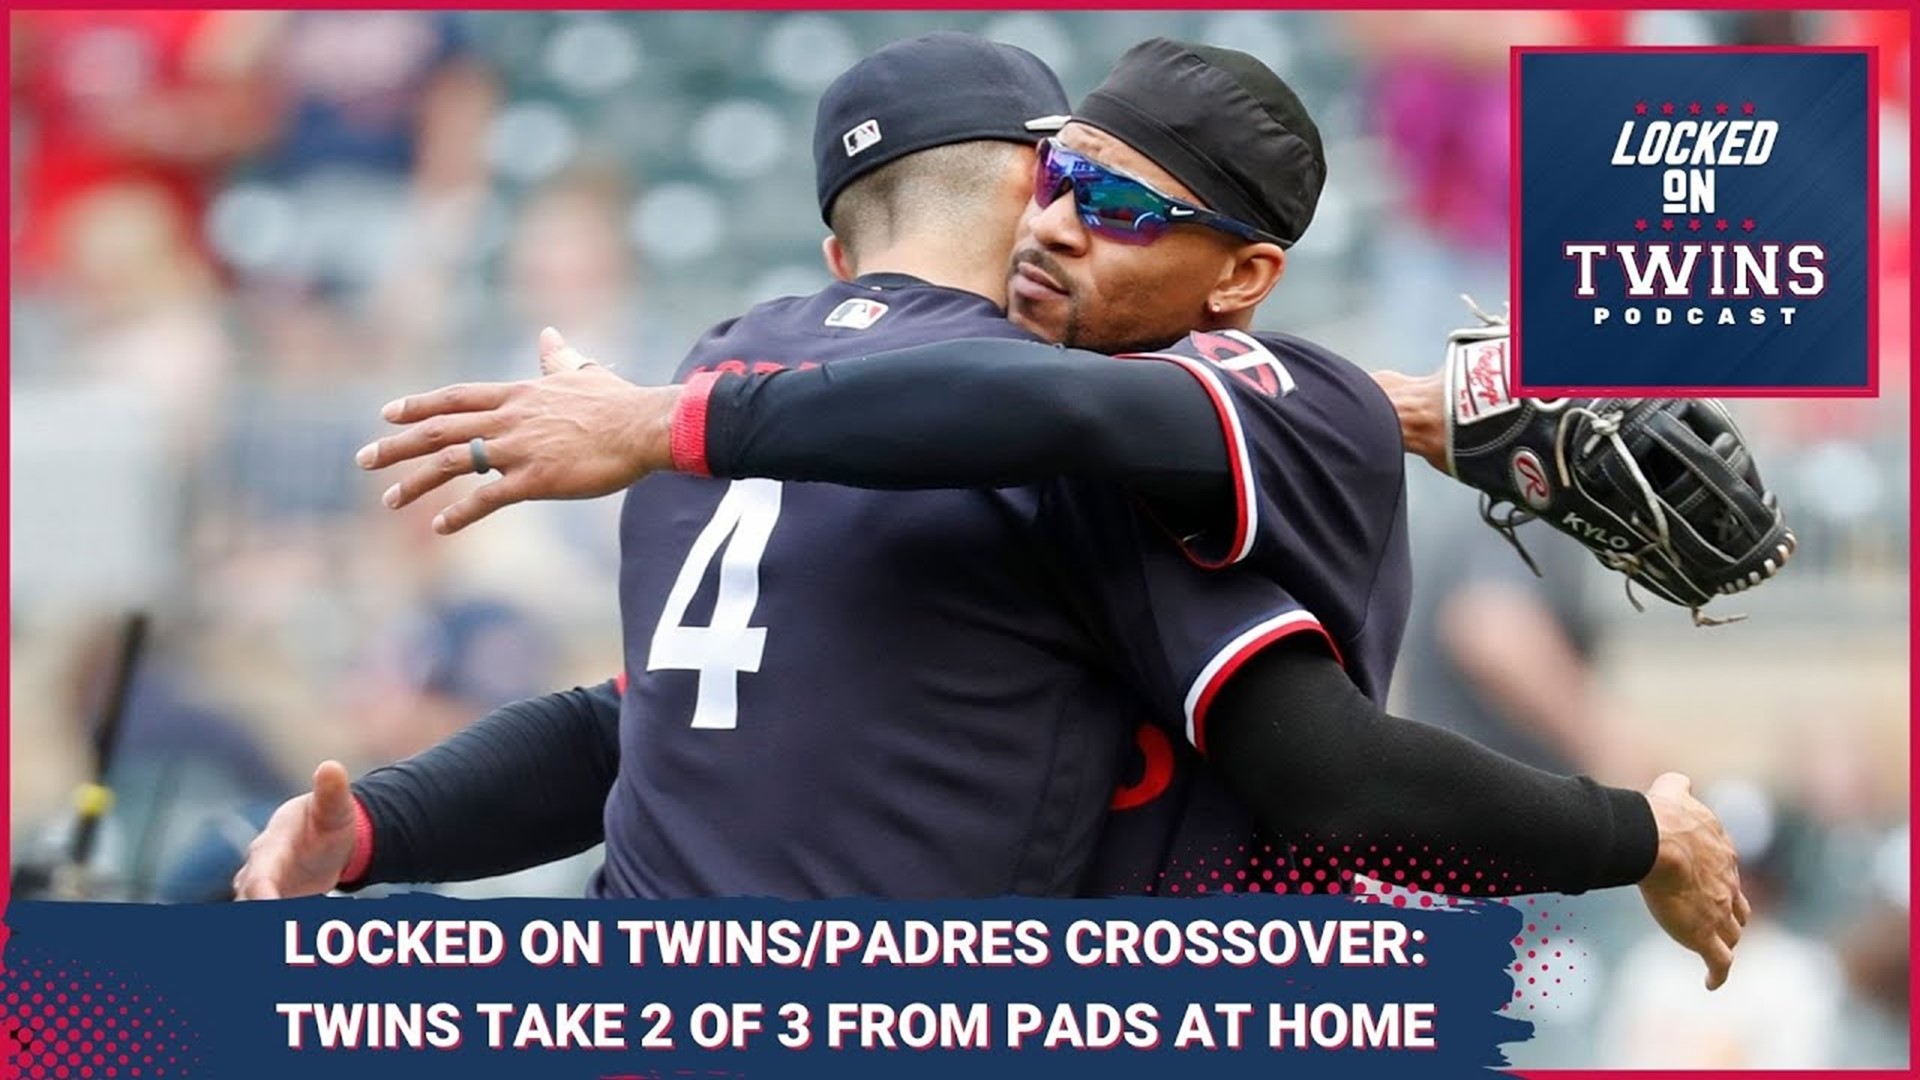 After losing the first game of the series at Target Field, the Minnesota Twins rebounded to win two straight and take the series 2-1 before welcoming the Chicago Cub